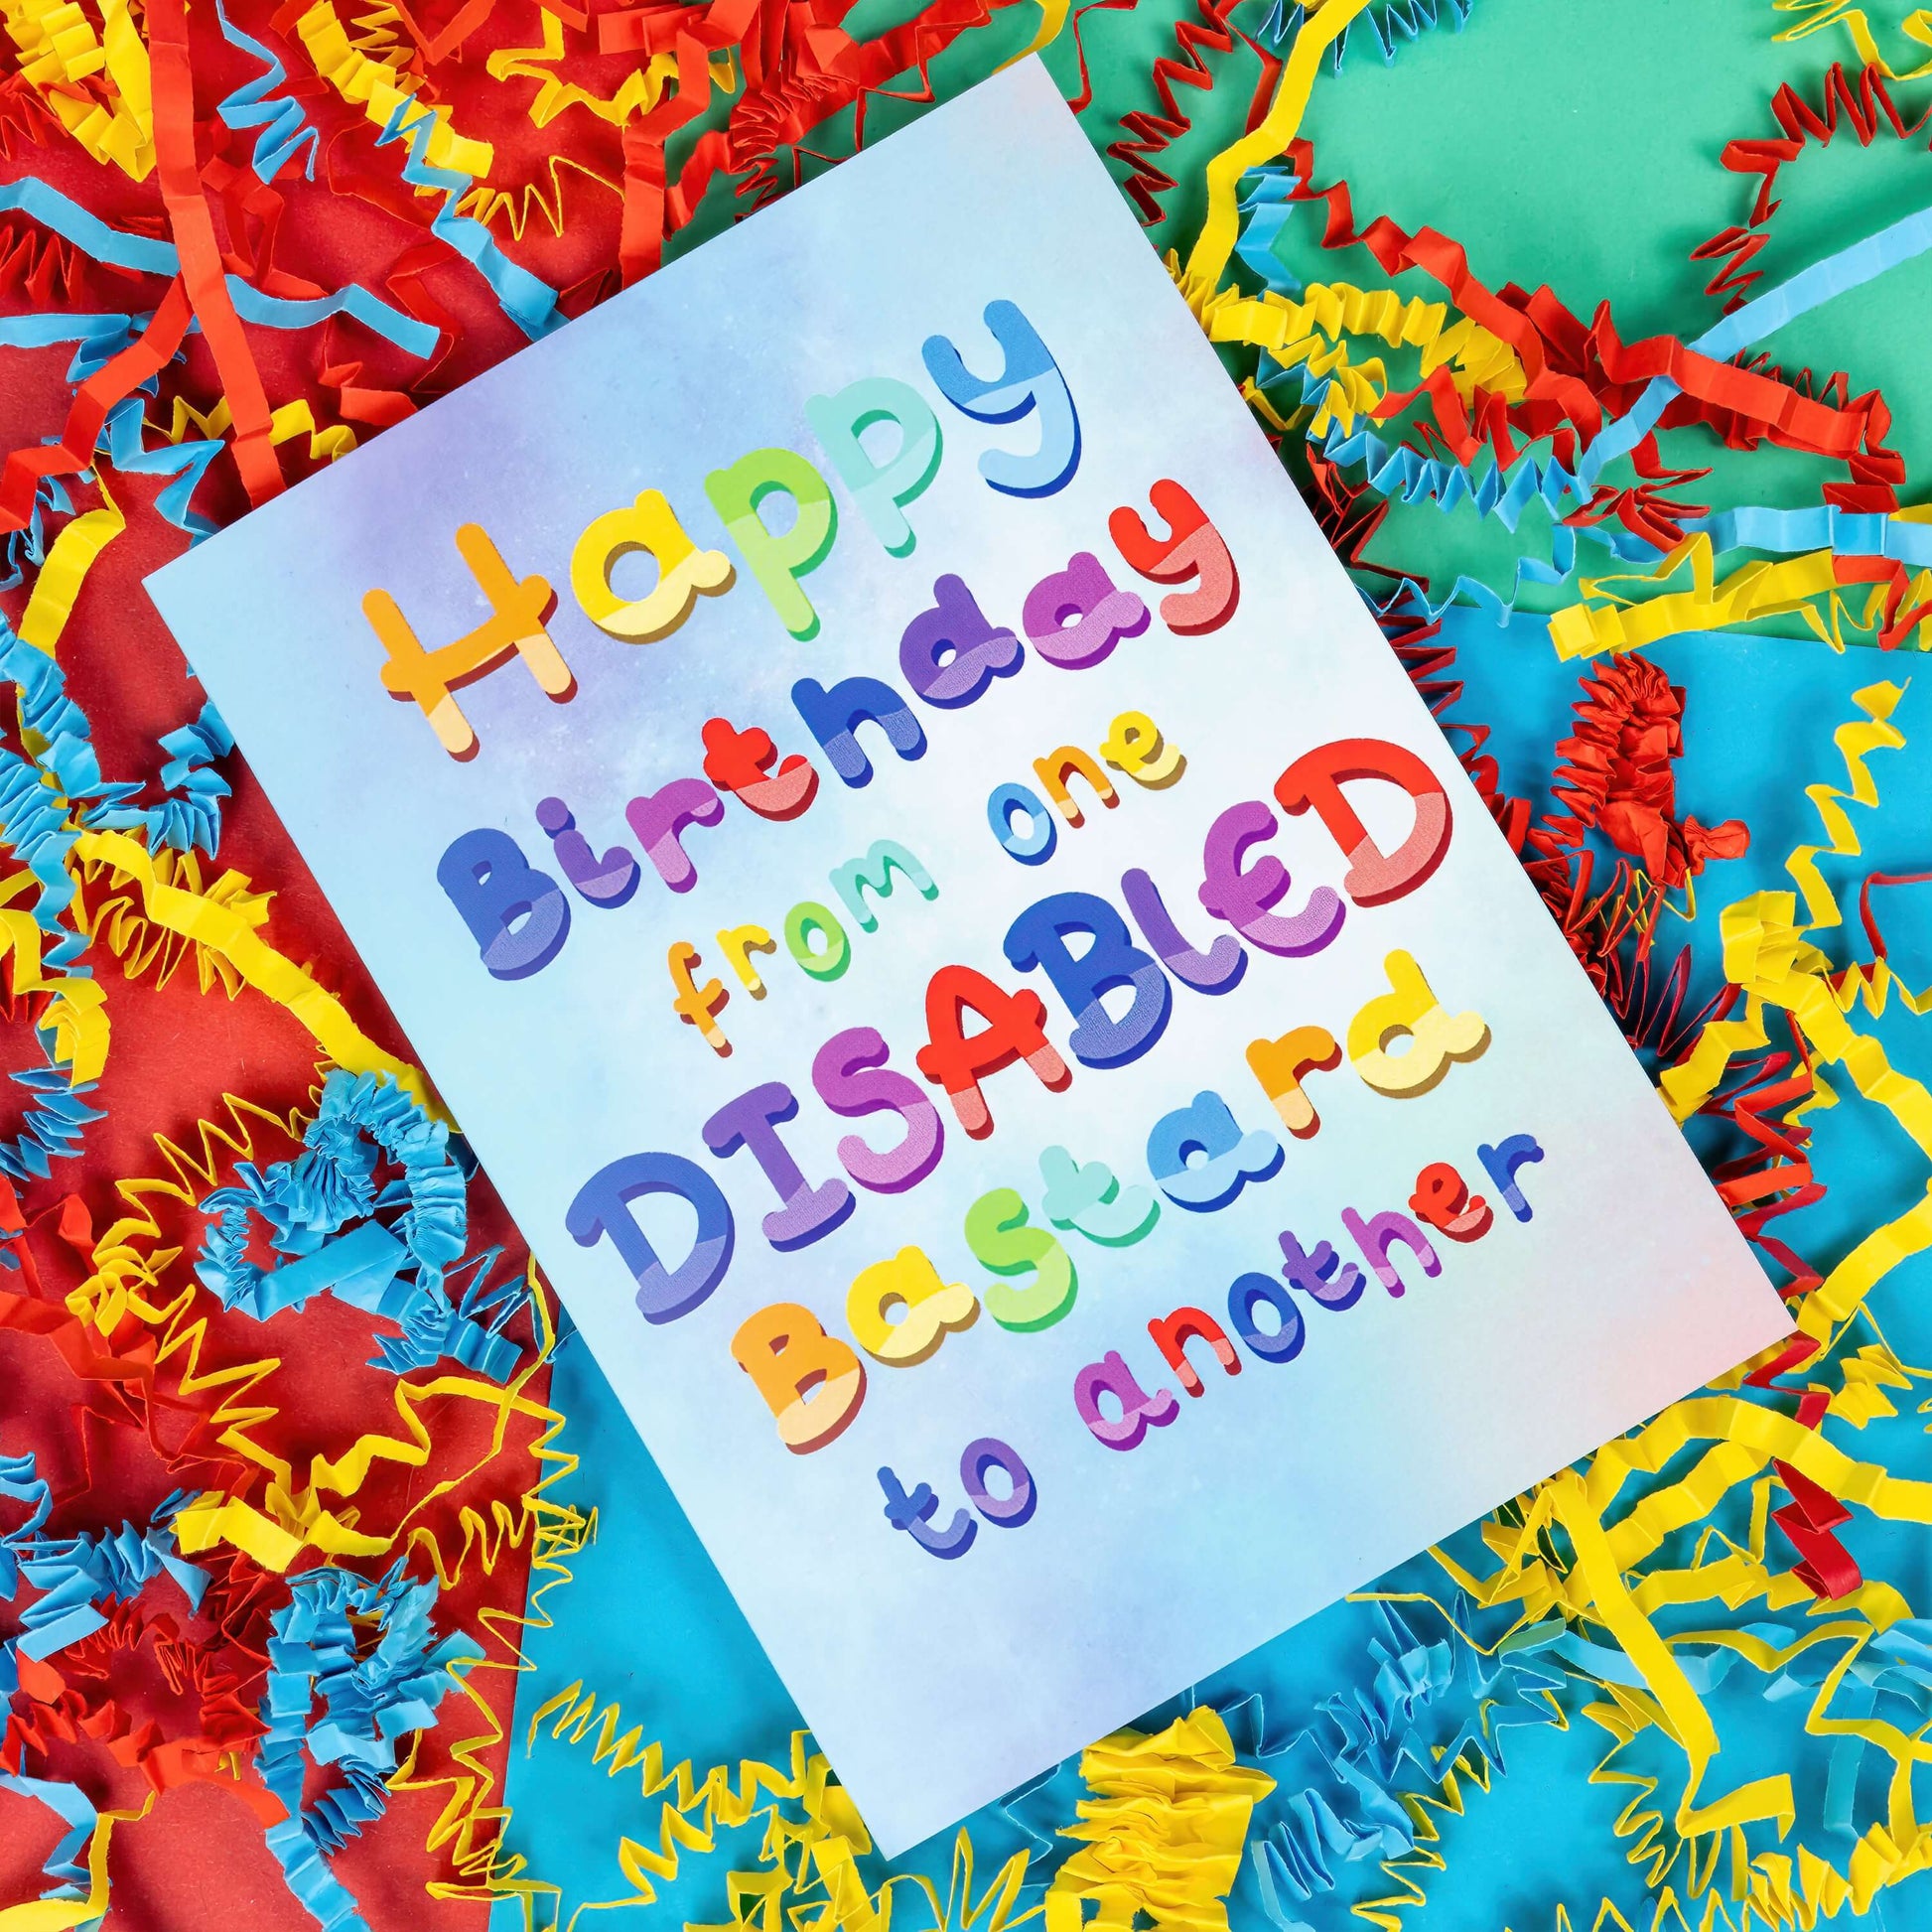 The Happy Birthday From One Disabled Bastard To Another Card on a red, blue and green background with red, yellow and blue crinkle card confetti. The pastel blue and purple a6 birthday card has rainbow bubble writing reading 'happy birthday from one disabled bastard to another'. The hand drawn design is a humorous greeting card raising awareness for disabled people.